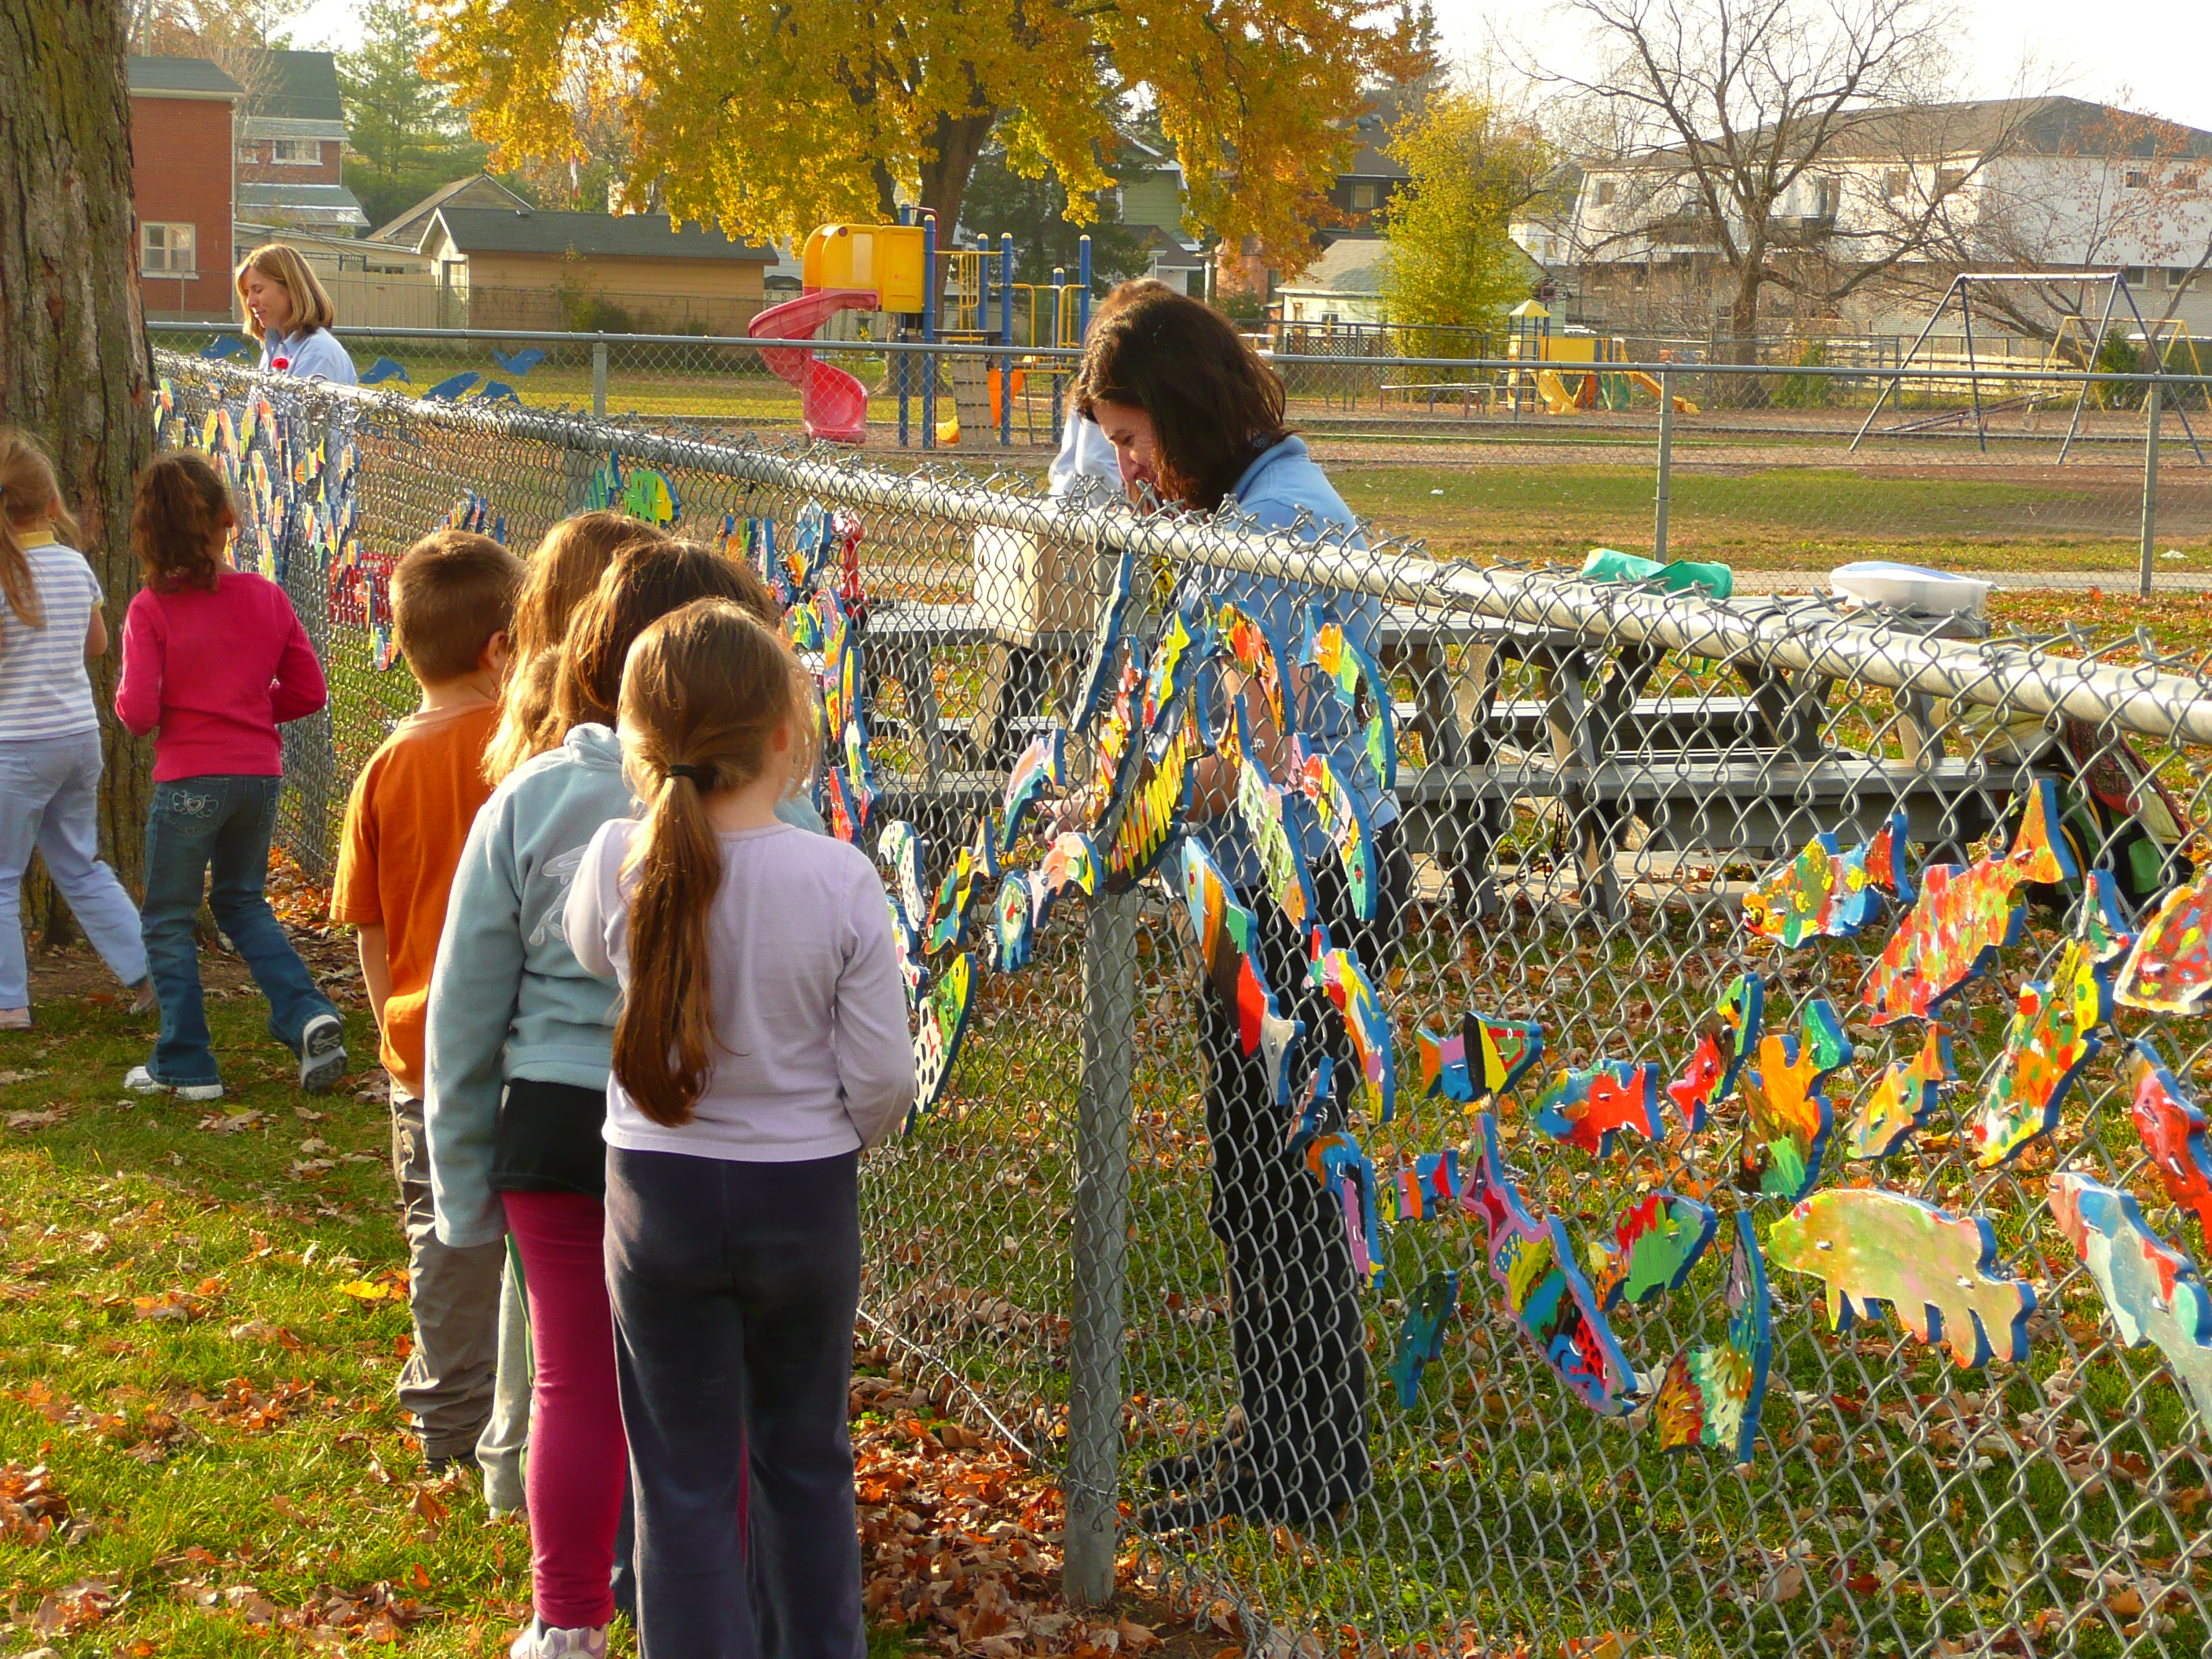 Children looking at painted fish on a fence infront of a school